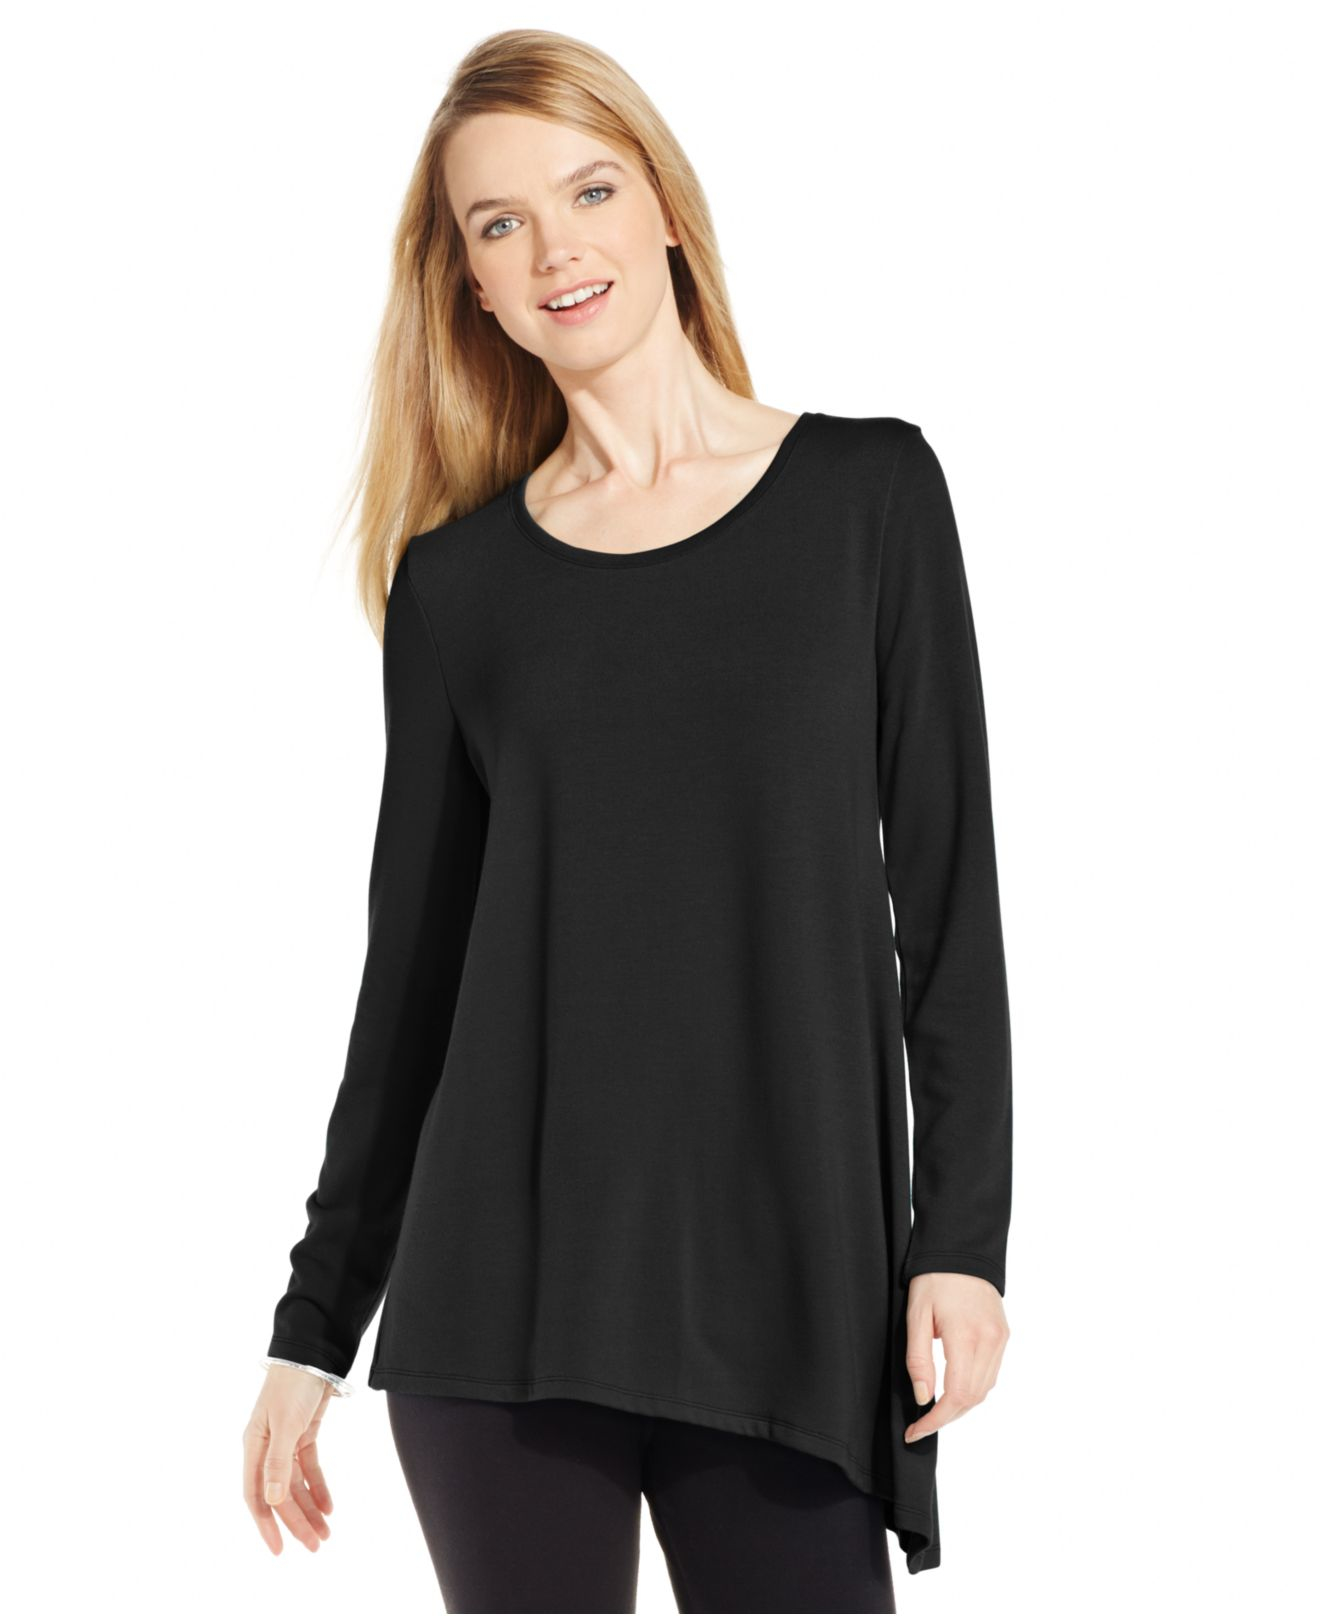 Style & Co. | Black Only At Macy's | Lyst